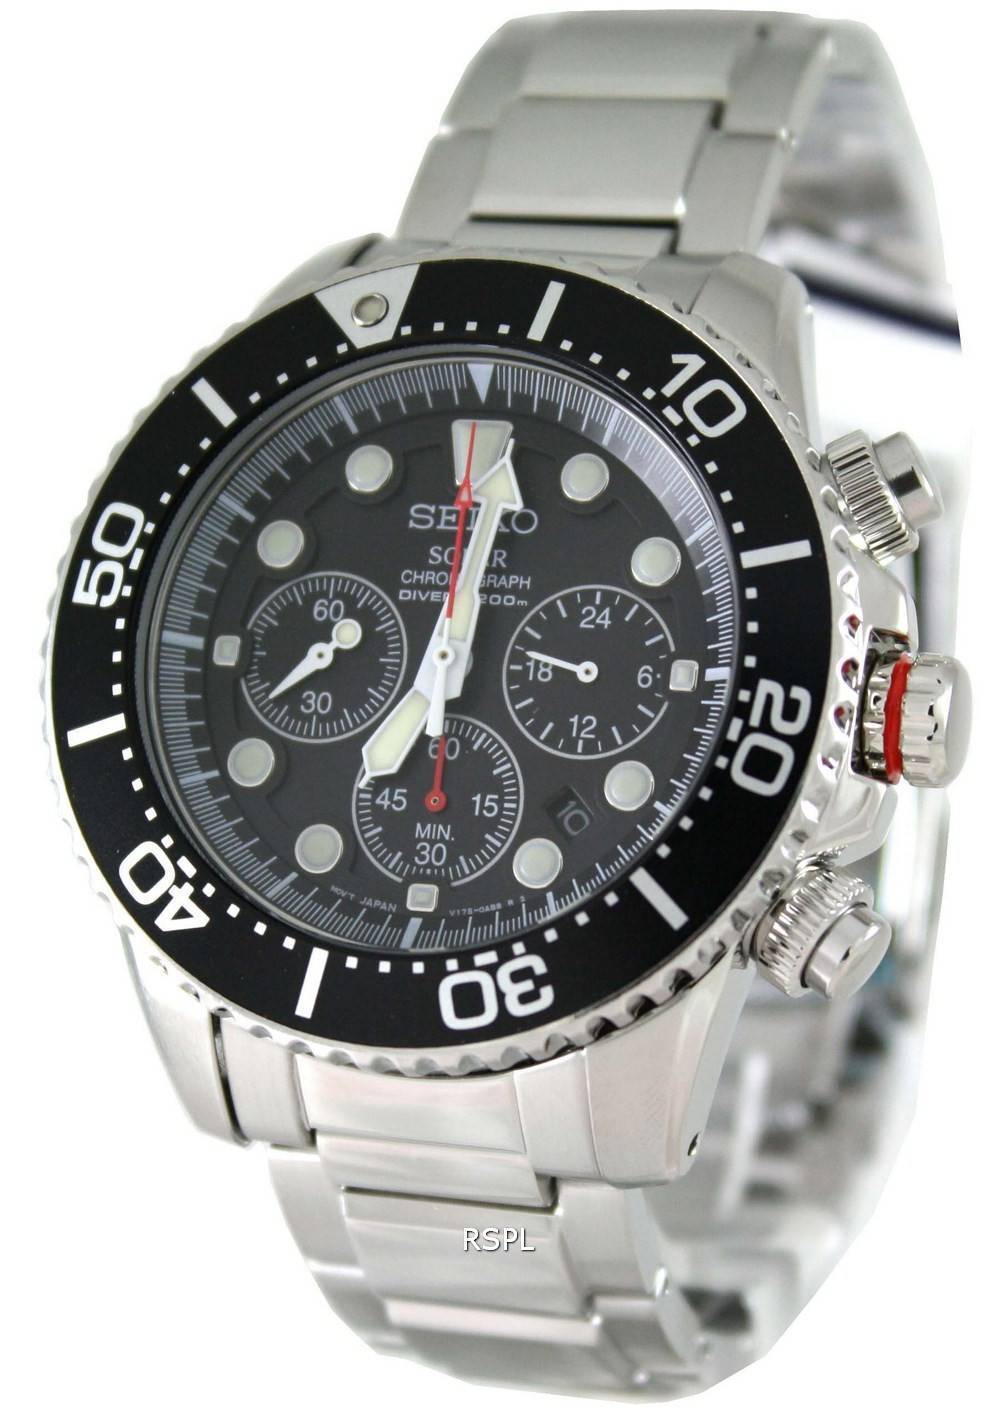 Seiko Solar Chronograph Divers SSC015P1 Mens Watch - CityWatches.co.nz